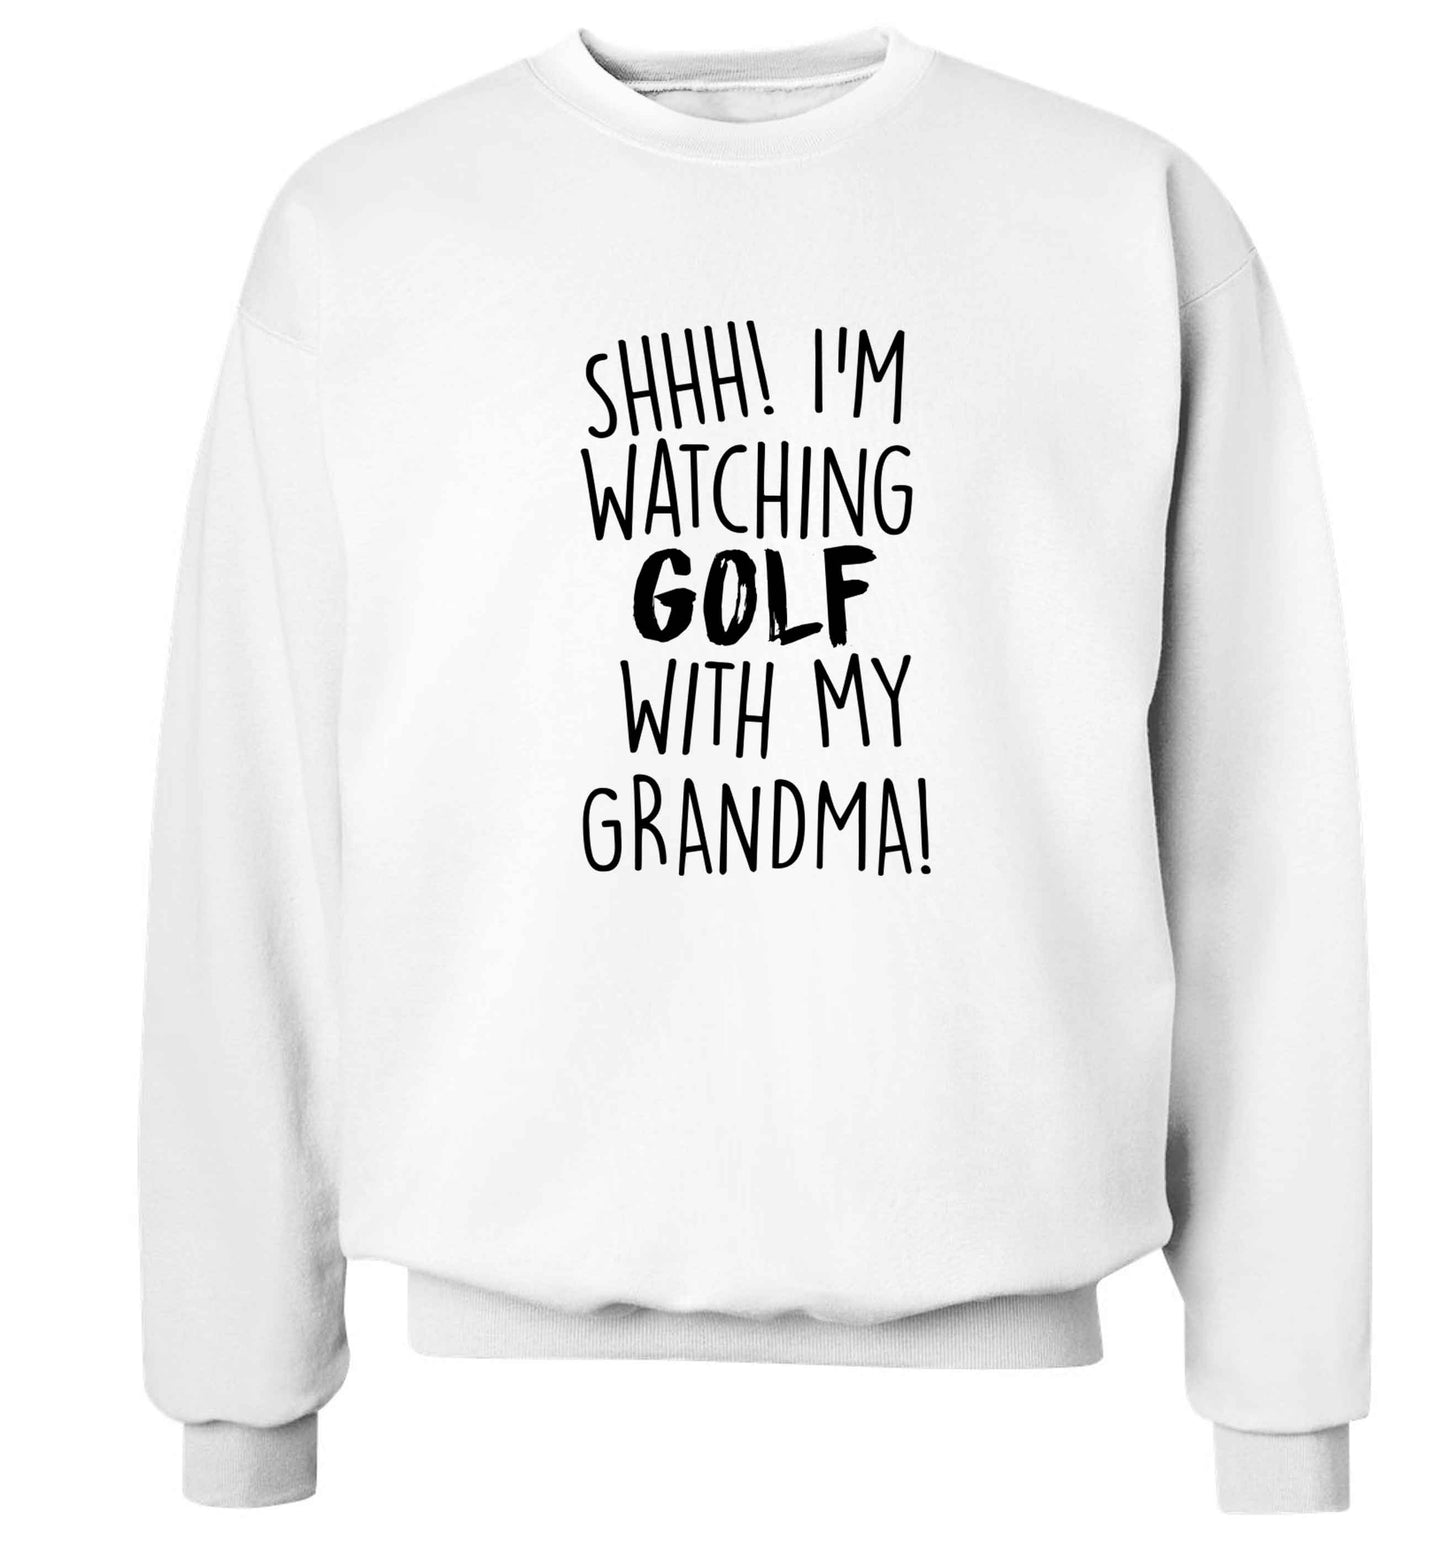 Shh I'm watching golf with my grandma Adult's unisex white Sweater 2XL